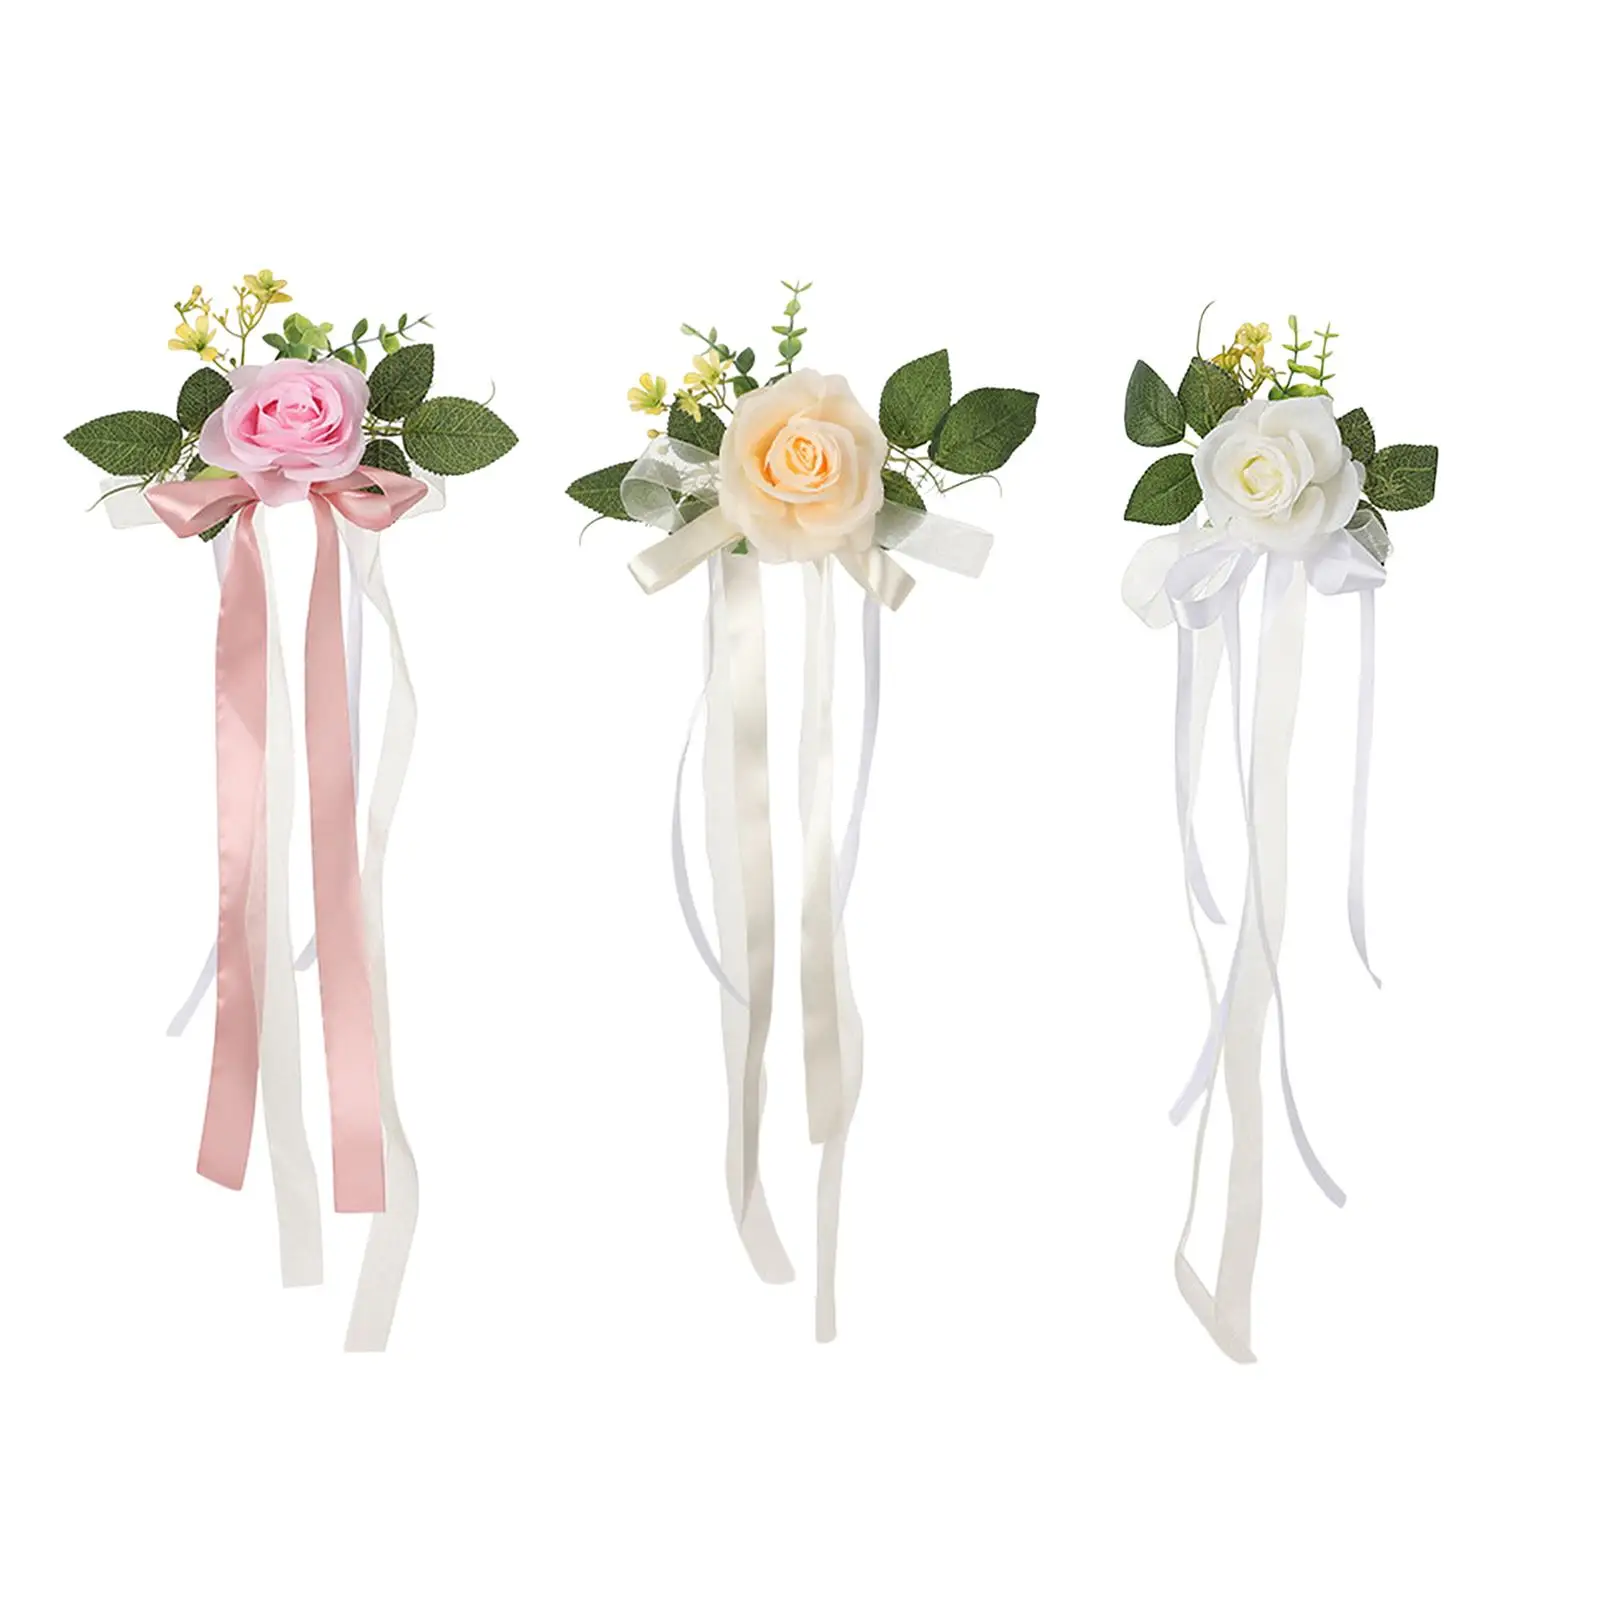 PEW Flowers for Chair Artificial Flowers Wedding Ceremony Aisle Decorations for Ceremony Party Wedding Engagement Birthday